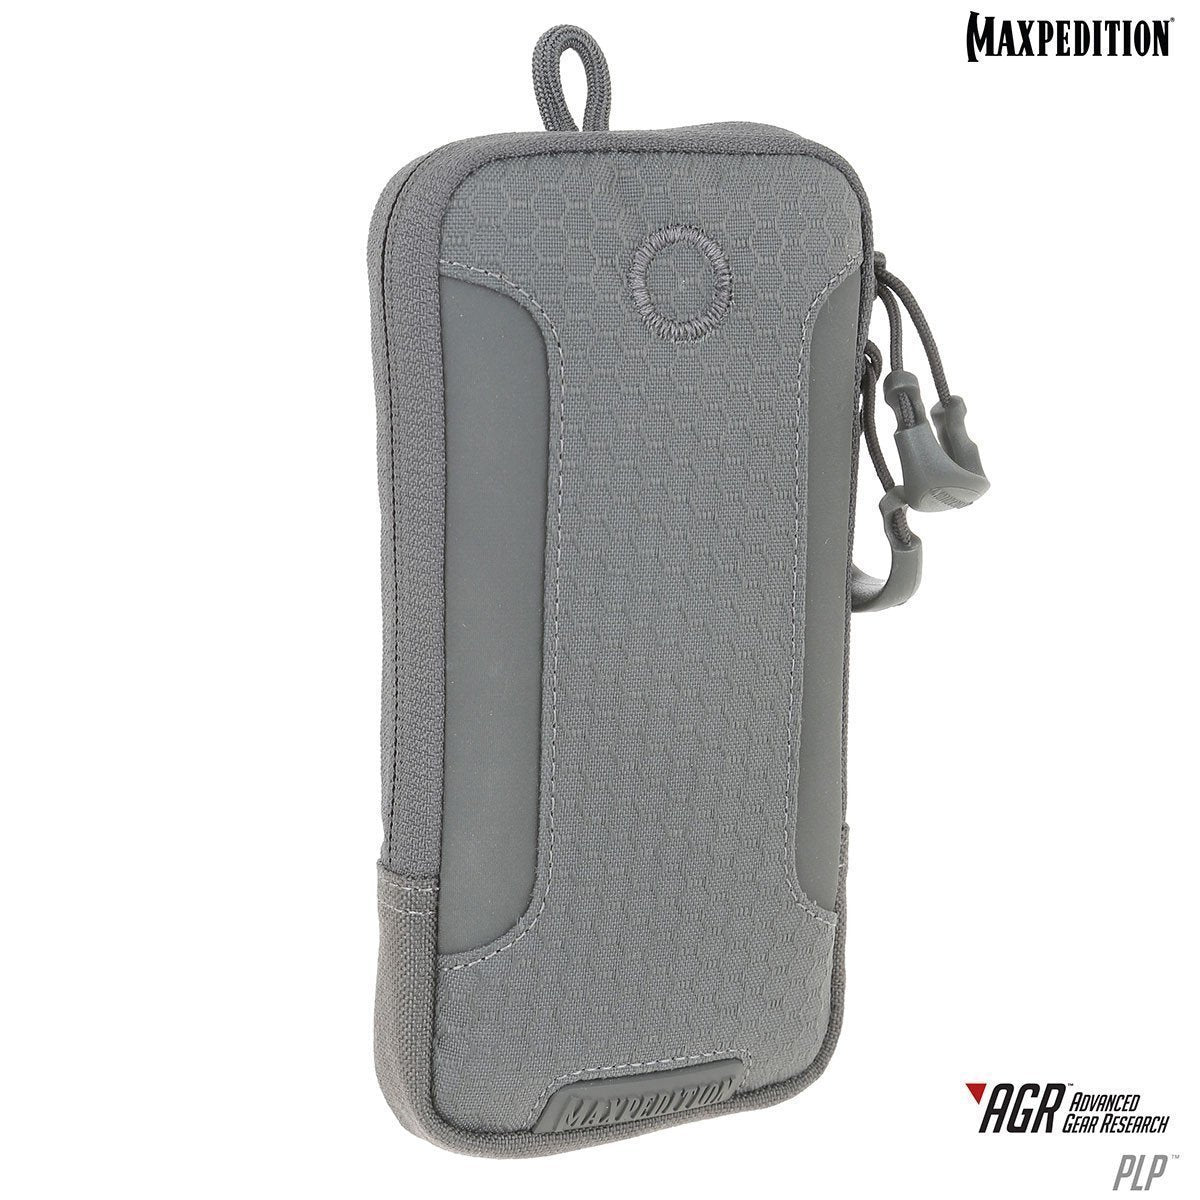 PLP™ iPhone 6/6s/7 Plus Pouch | Maxpedition  Tactical Gear